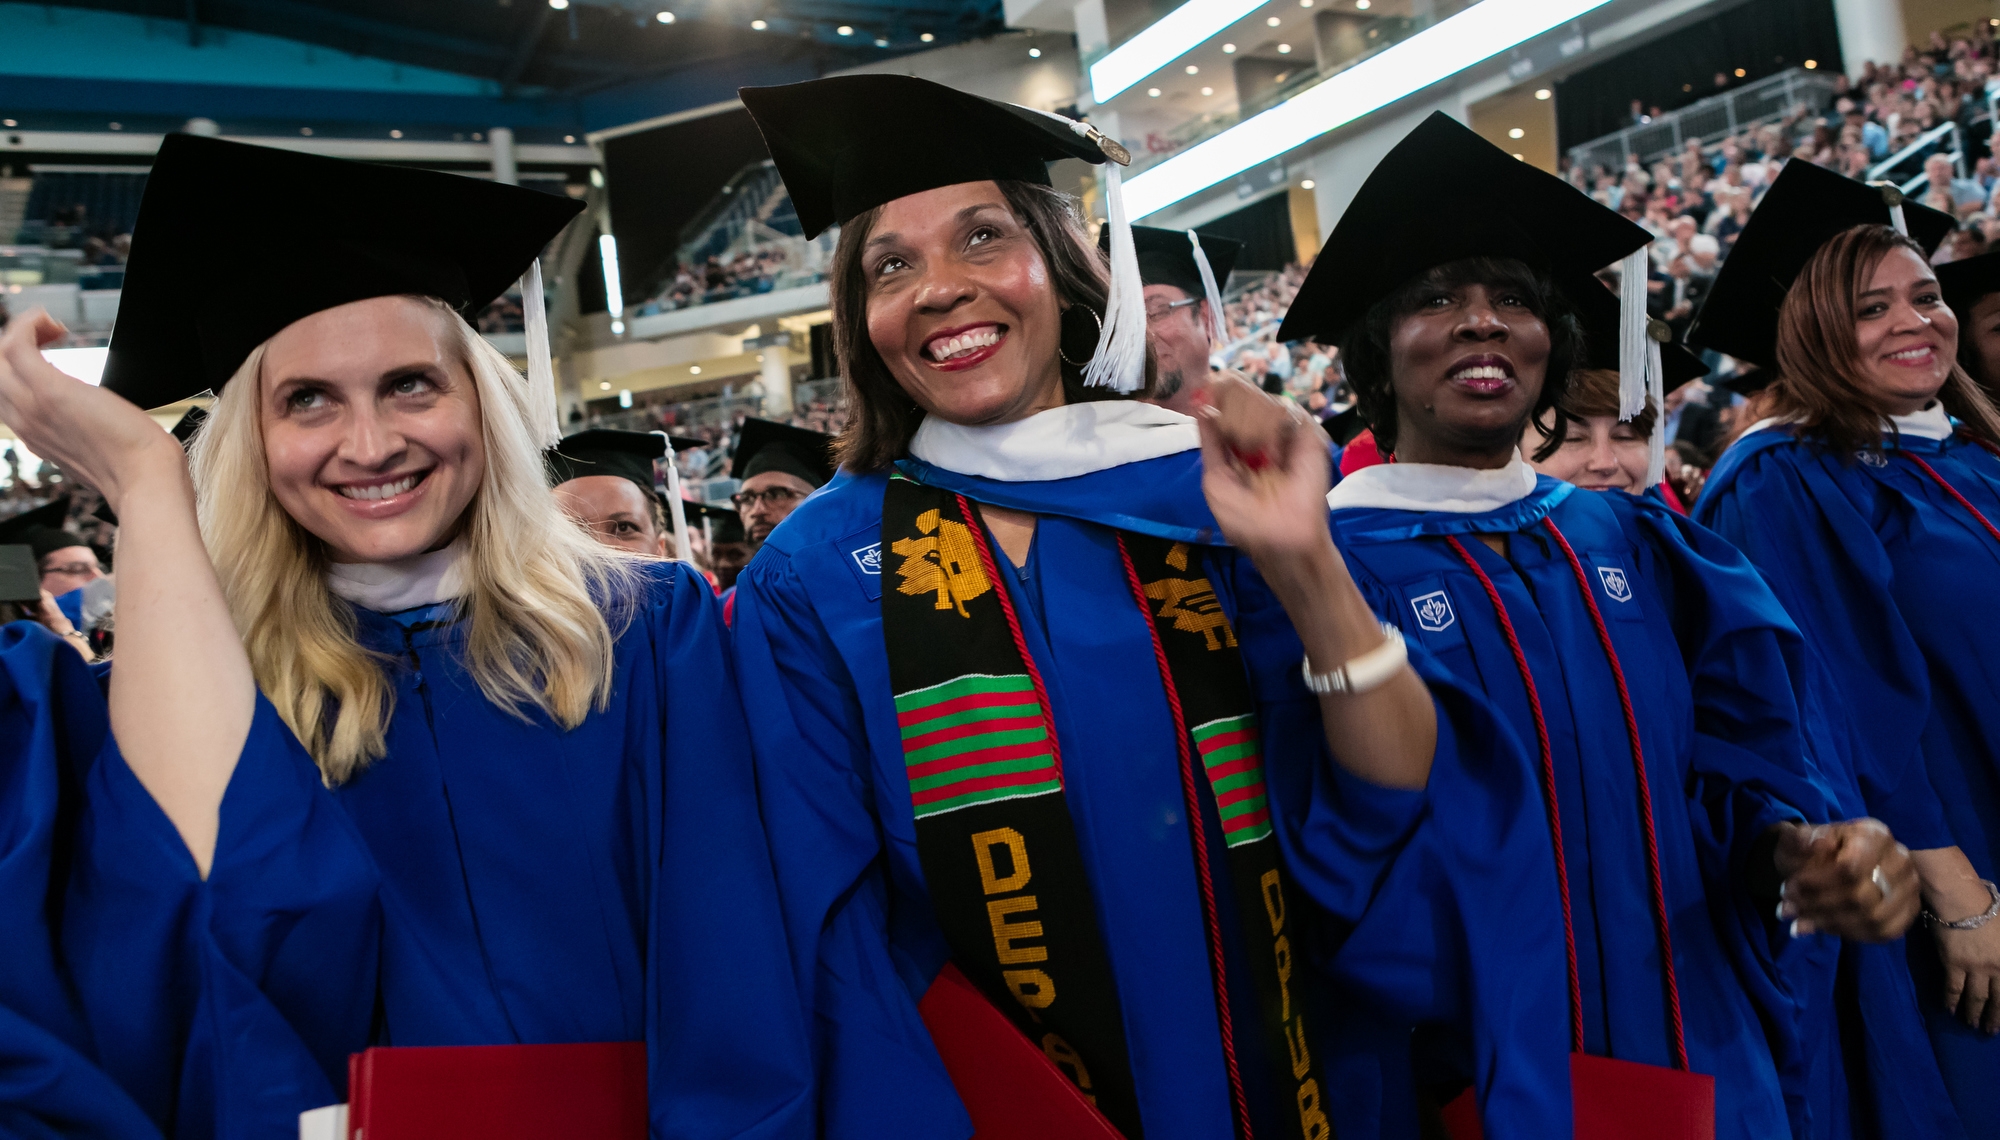 Students are all smiles after flipping their tassels at the end of the College of Liberal Arts and Social Sciences and the School for New Learning ceremony in Wintrust Arena. Approximately 6,700 students graduated during five ceremonies held over the weekend in Chicago. (DePaul University/Jeff Carrion)